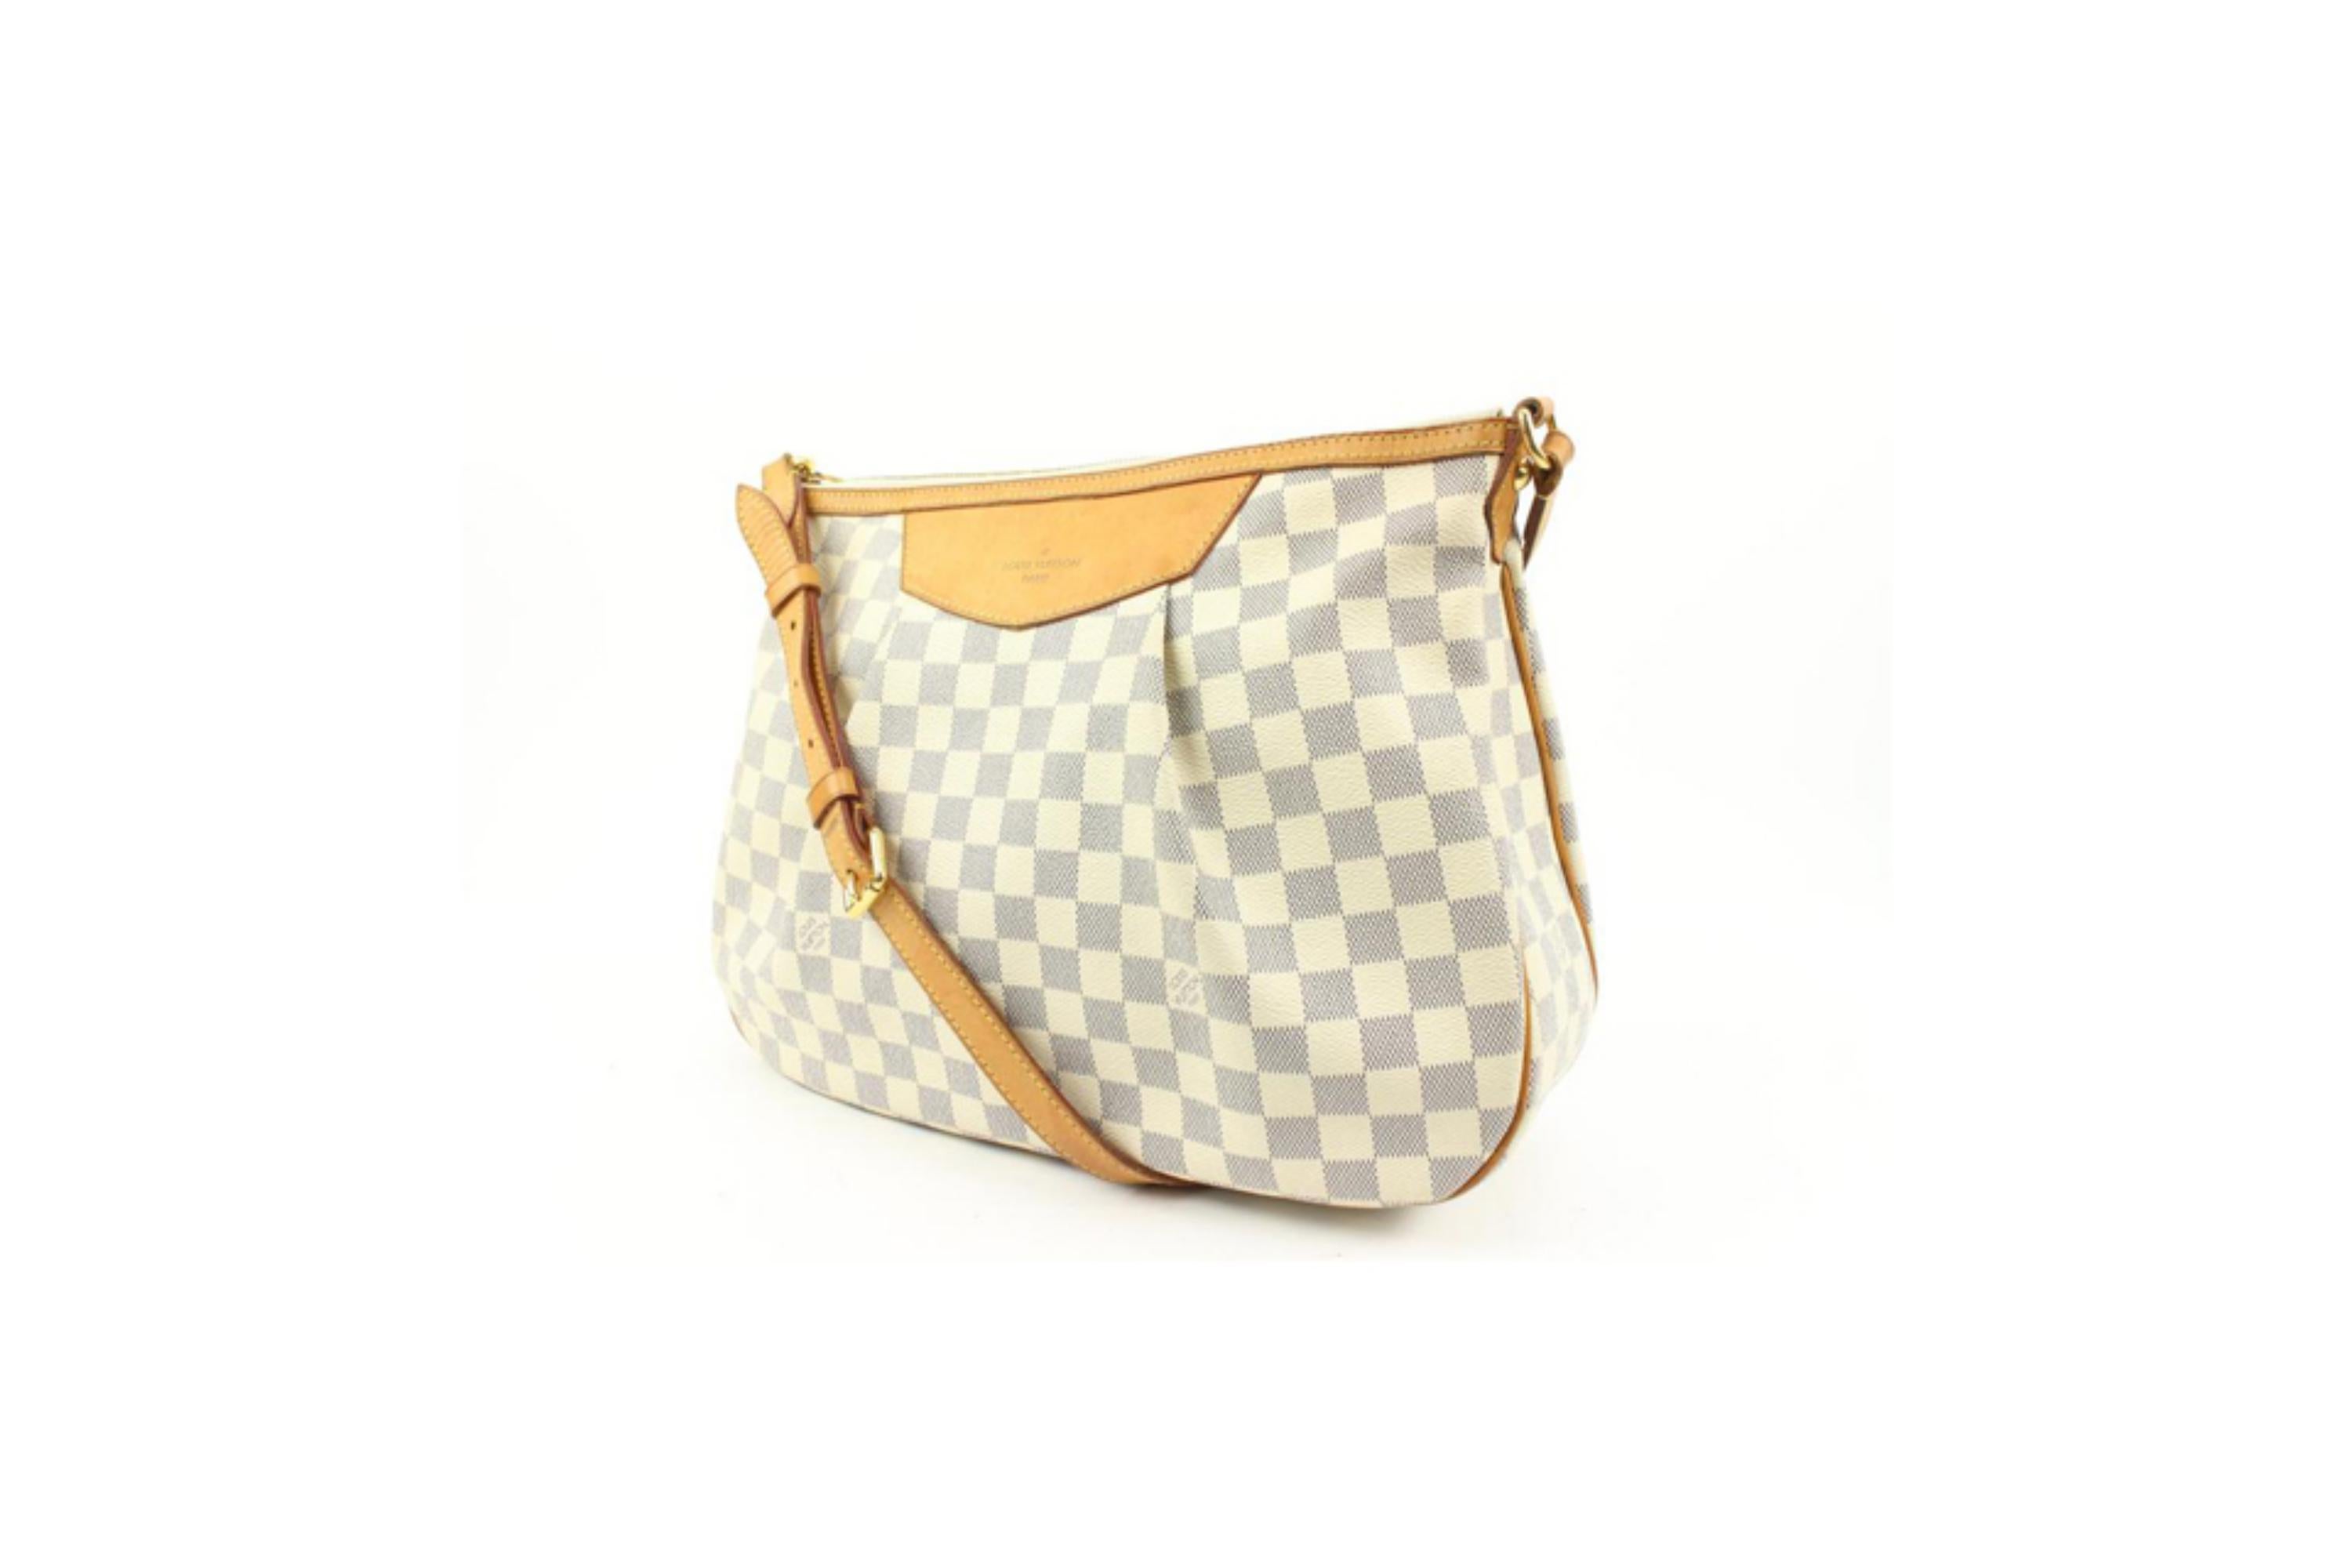 Louis Vuitton Discontinued Damier Azur Siracusa MM Bloomsbury Crossbody 63lv23s
Date Code/Serial Number: MI3151
Made In: France
Measurements: Length:  14.5